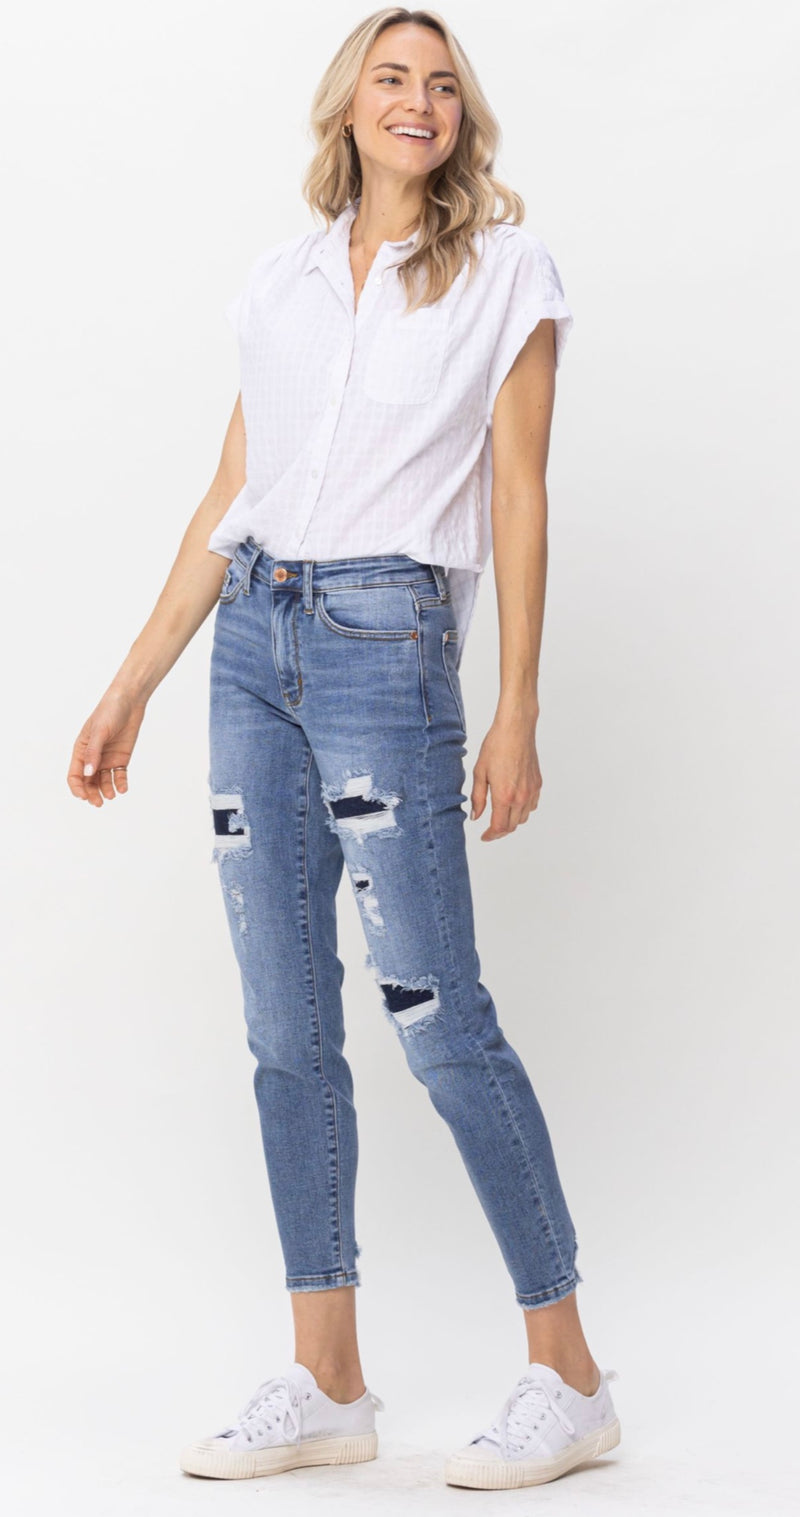 Judy Blue Not Over Yet Jeans